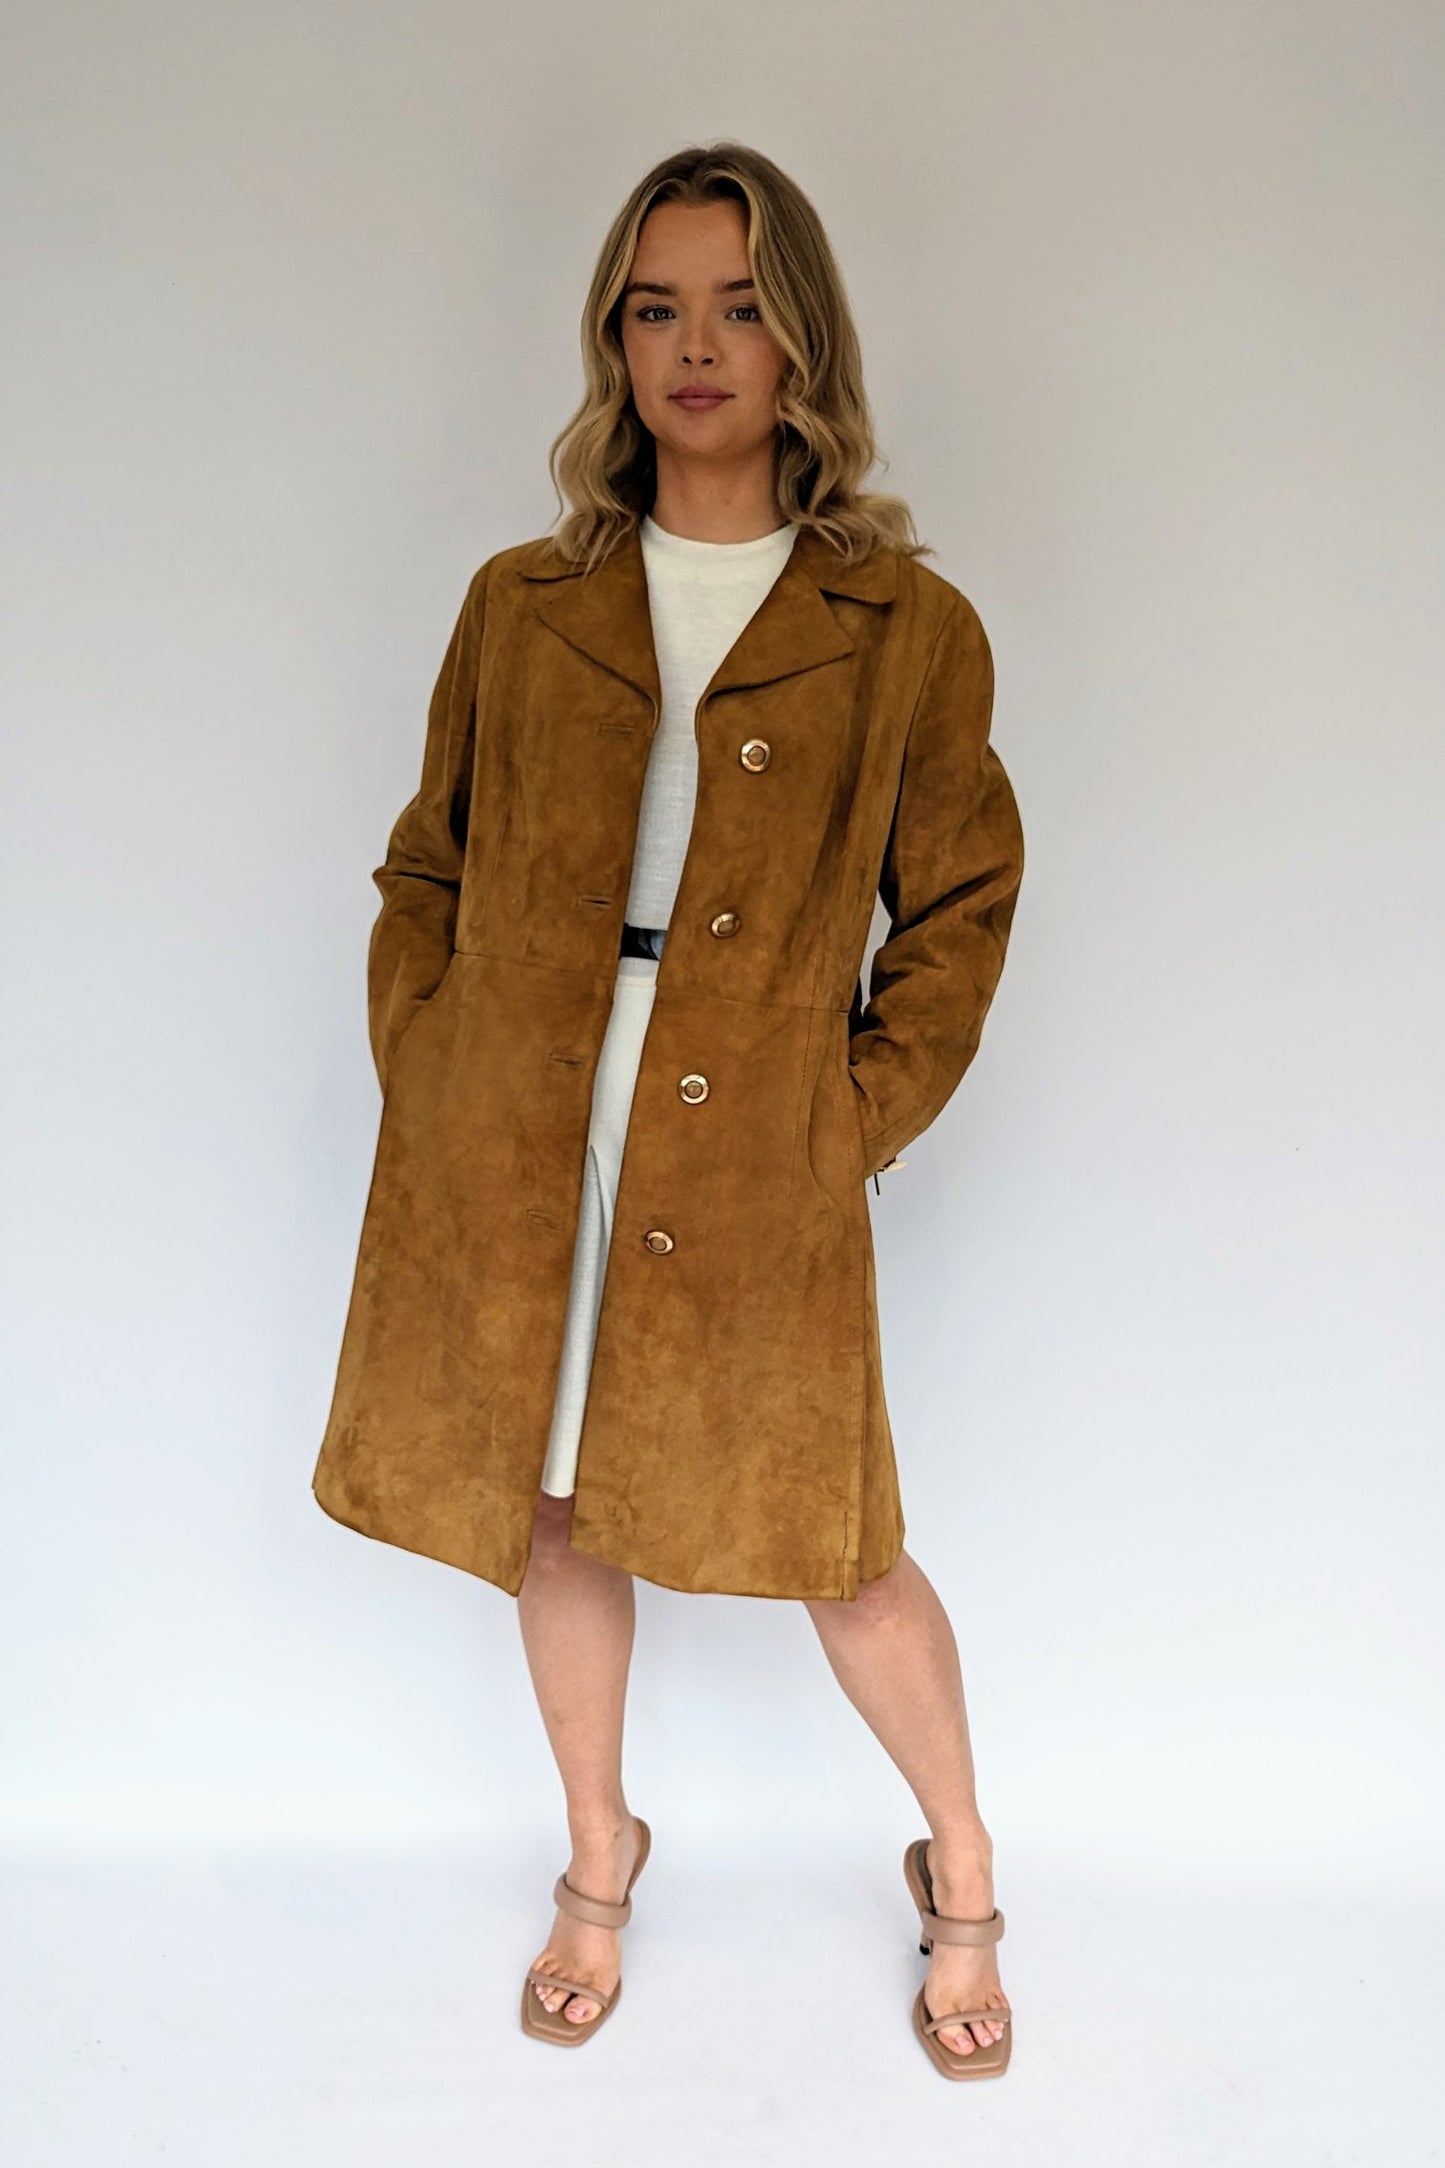 vintage suede long suede coat with pockets